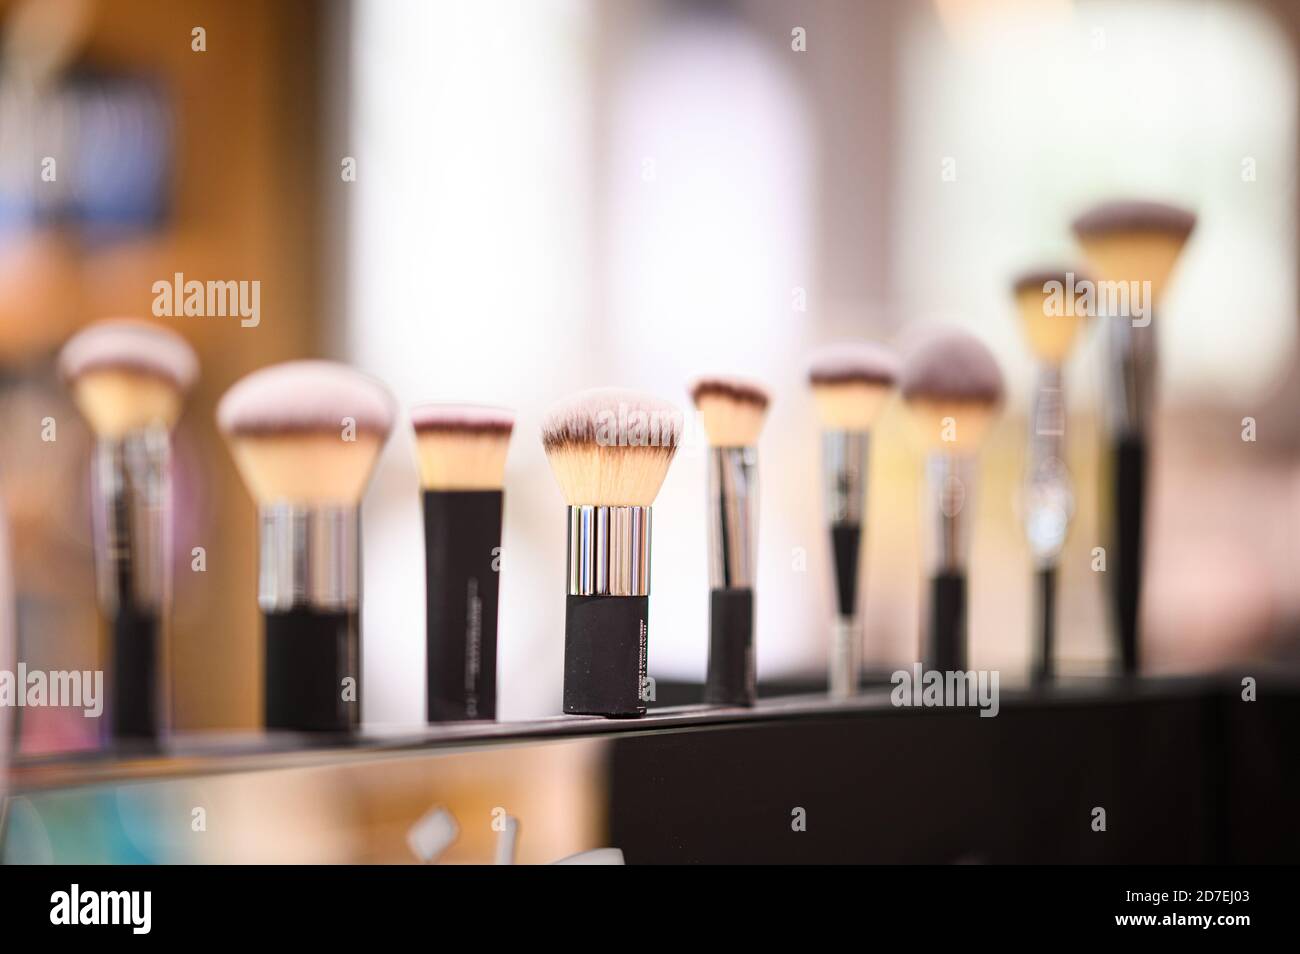 Flagship Beauty Store High Resolution Stock Photography and Images - Alamy